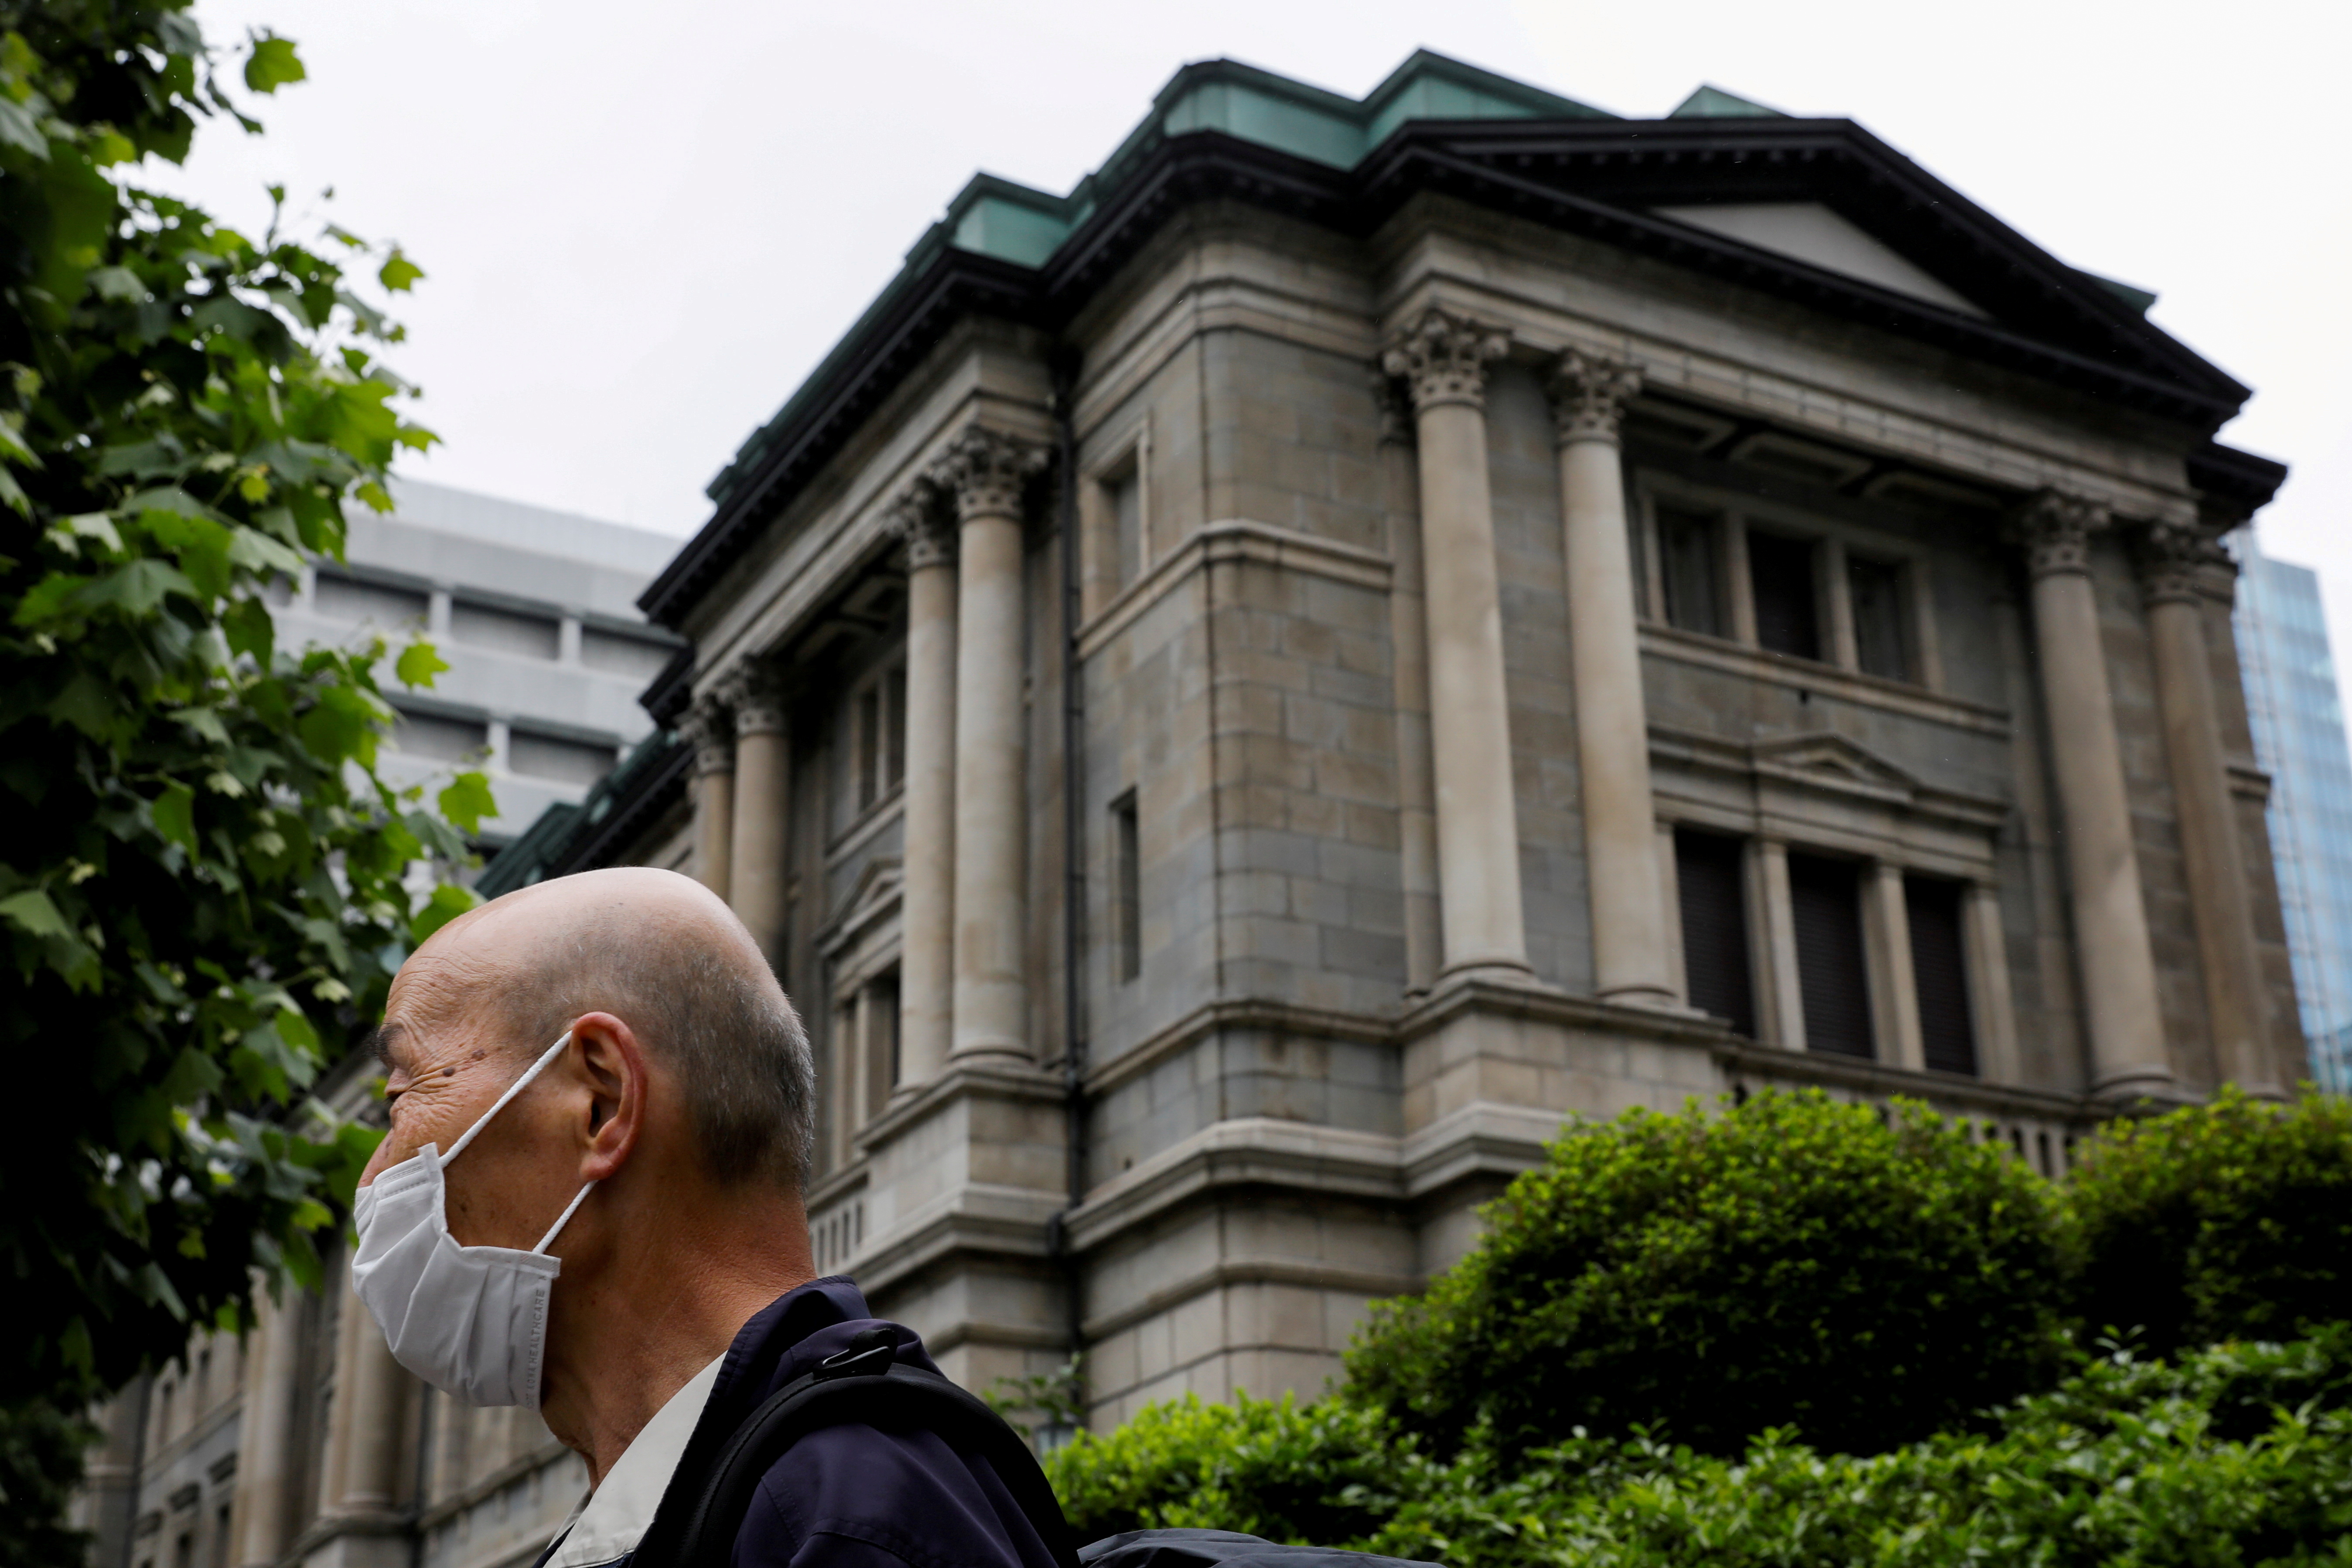 A man stands in front of the headquarters of Bank of Japan in Tokyo, Japan, May 22, 2020. REUTERS/Kim Kyung-Hoon